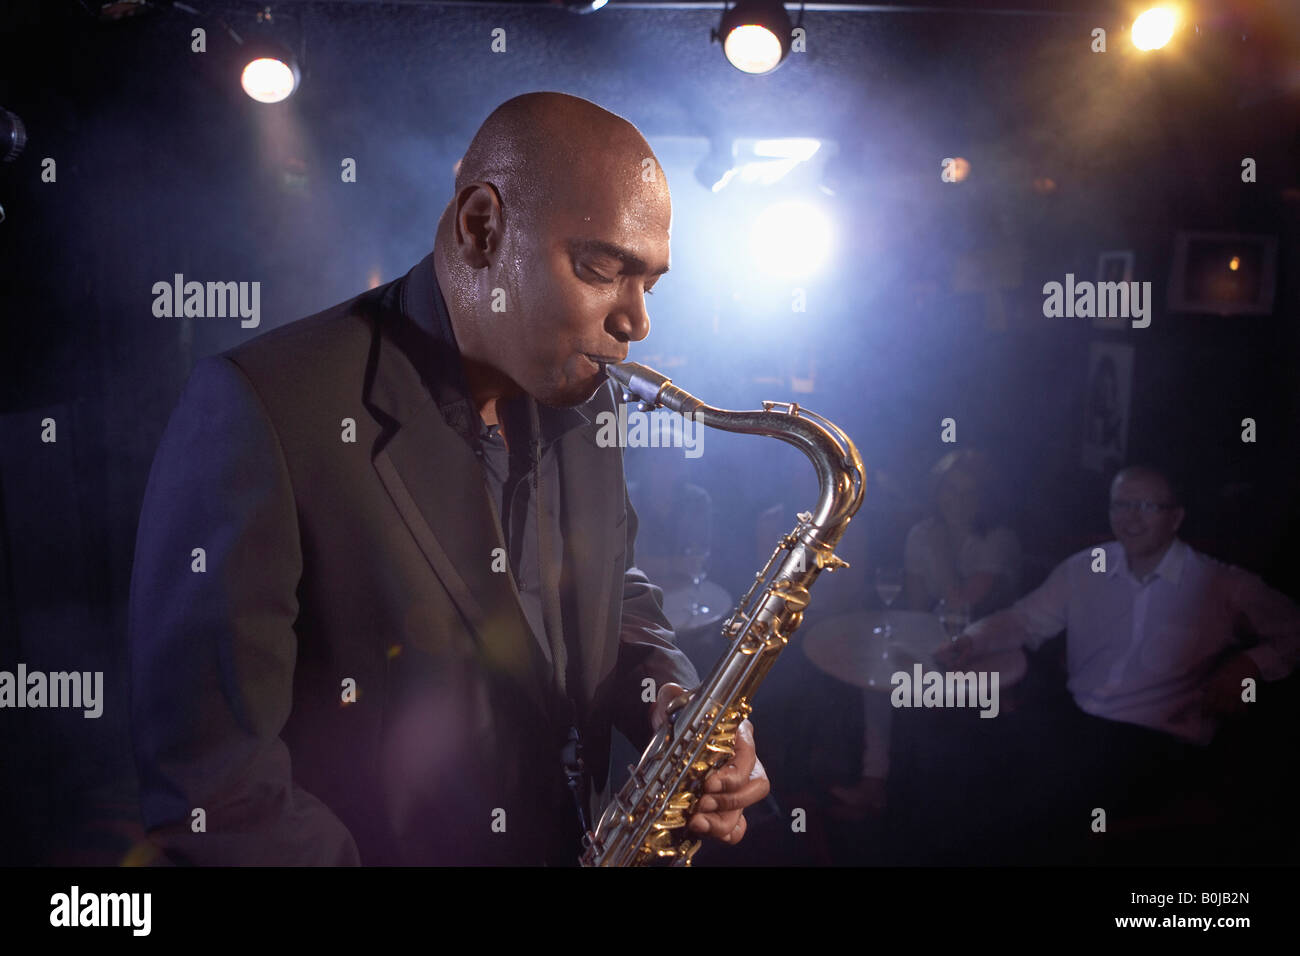 Saxophonist Performing in Jazz Club Stock Photo